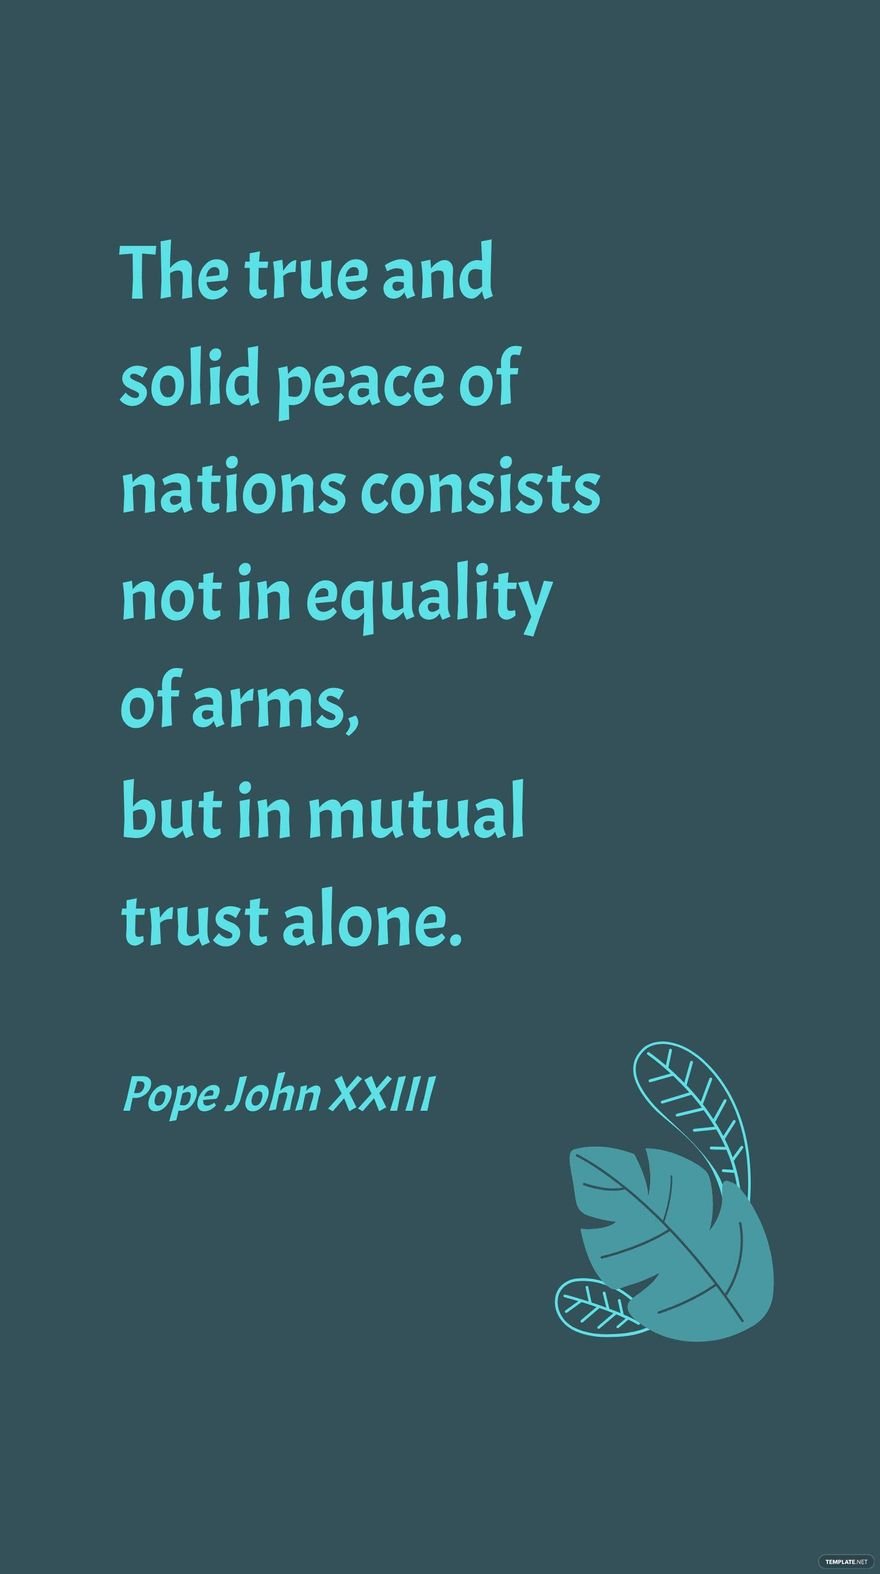 Pope John XXIII - The true and solid peace of nations consists not in equality of arms, but in mutual trust alone.